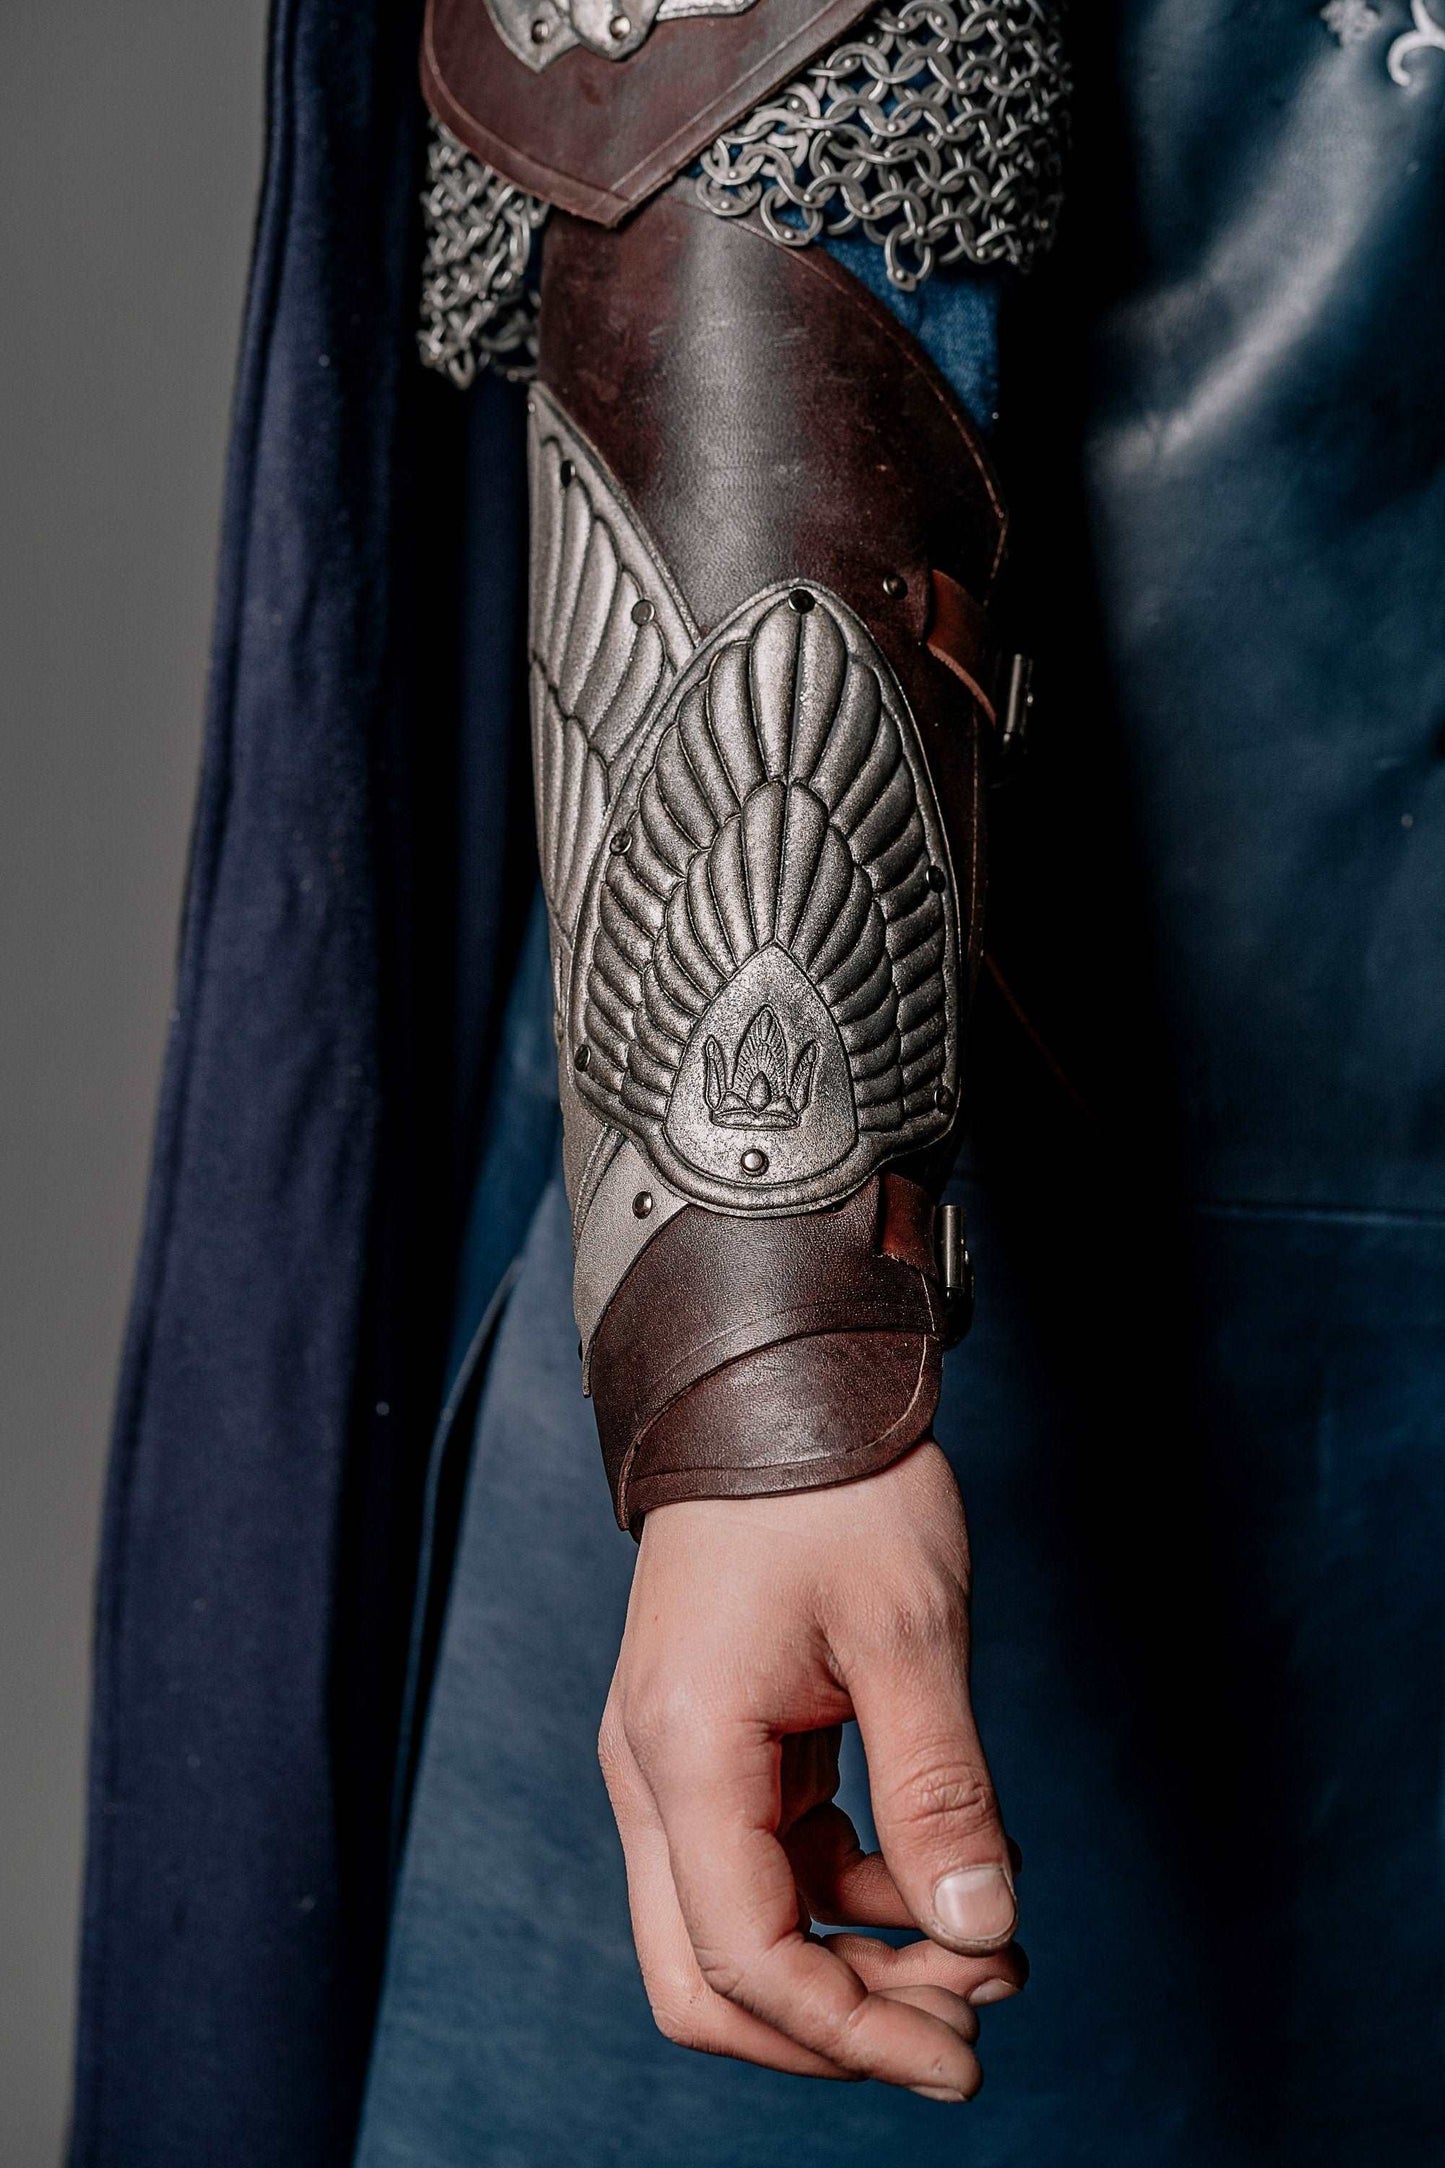 Aragorn's King bracers (Lord of the Rings)